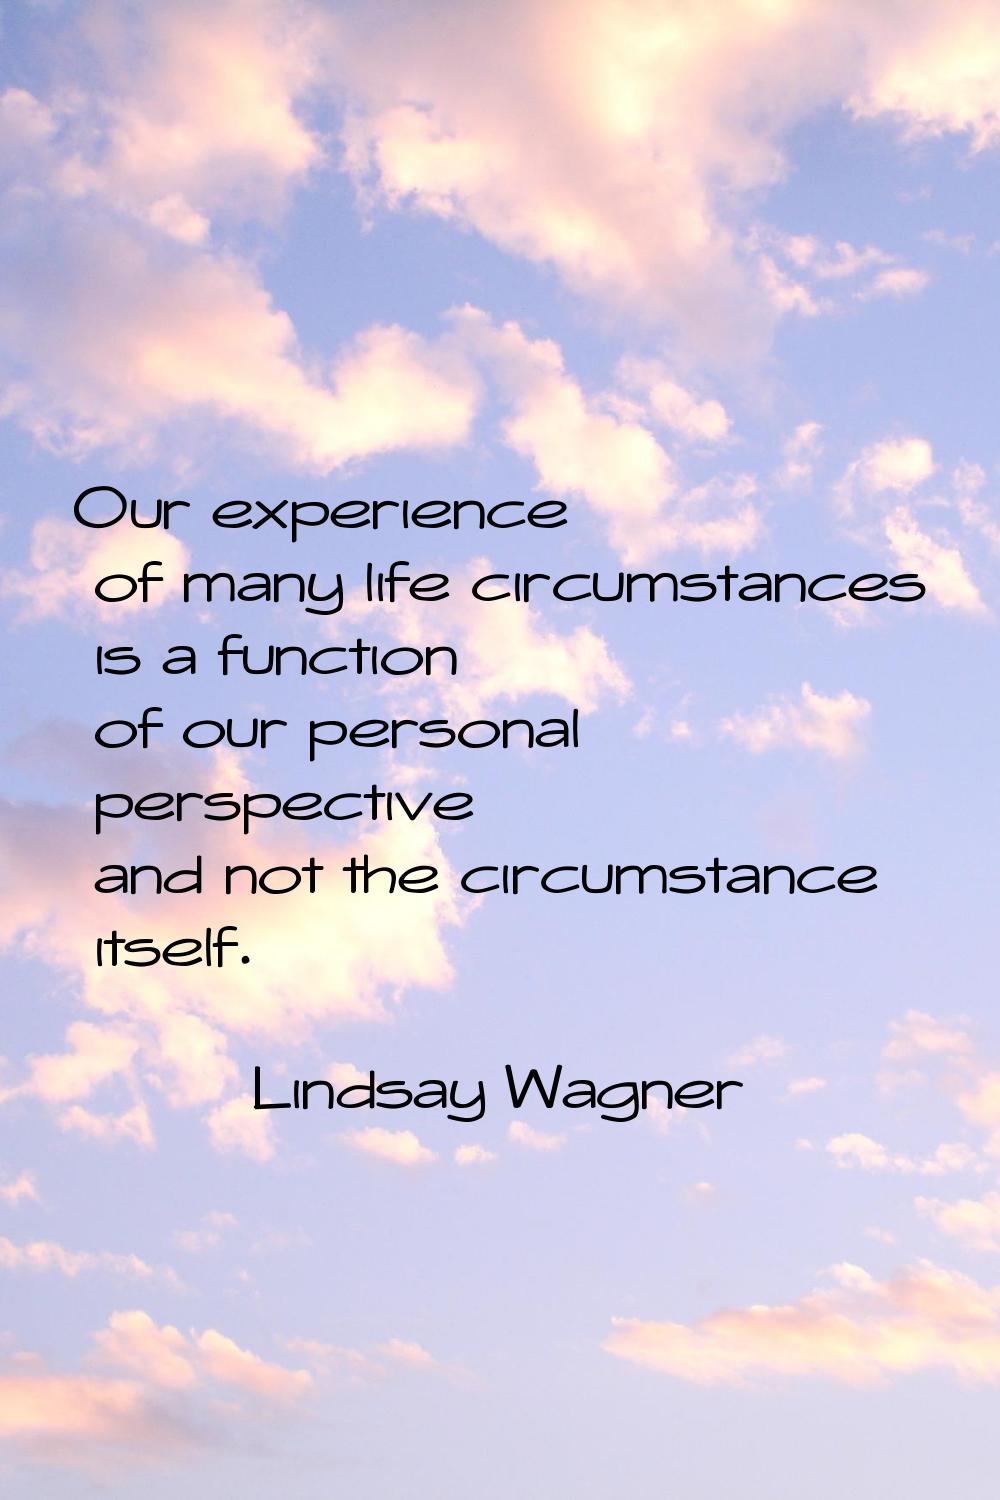 Our experience of many life circumstances is a function of our personal perspective and not the cir